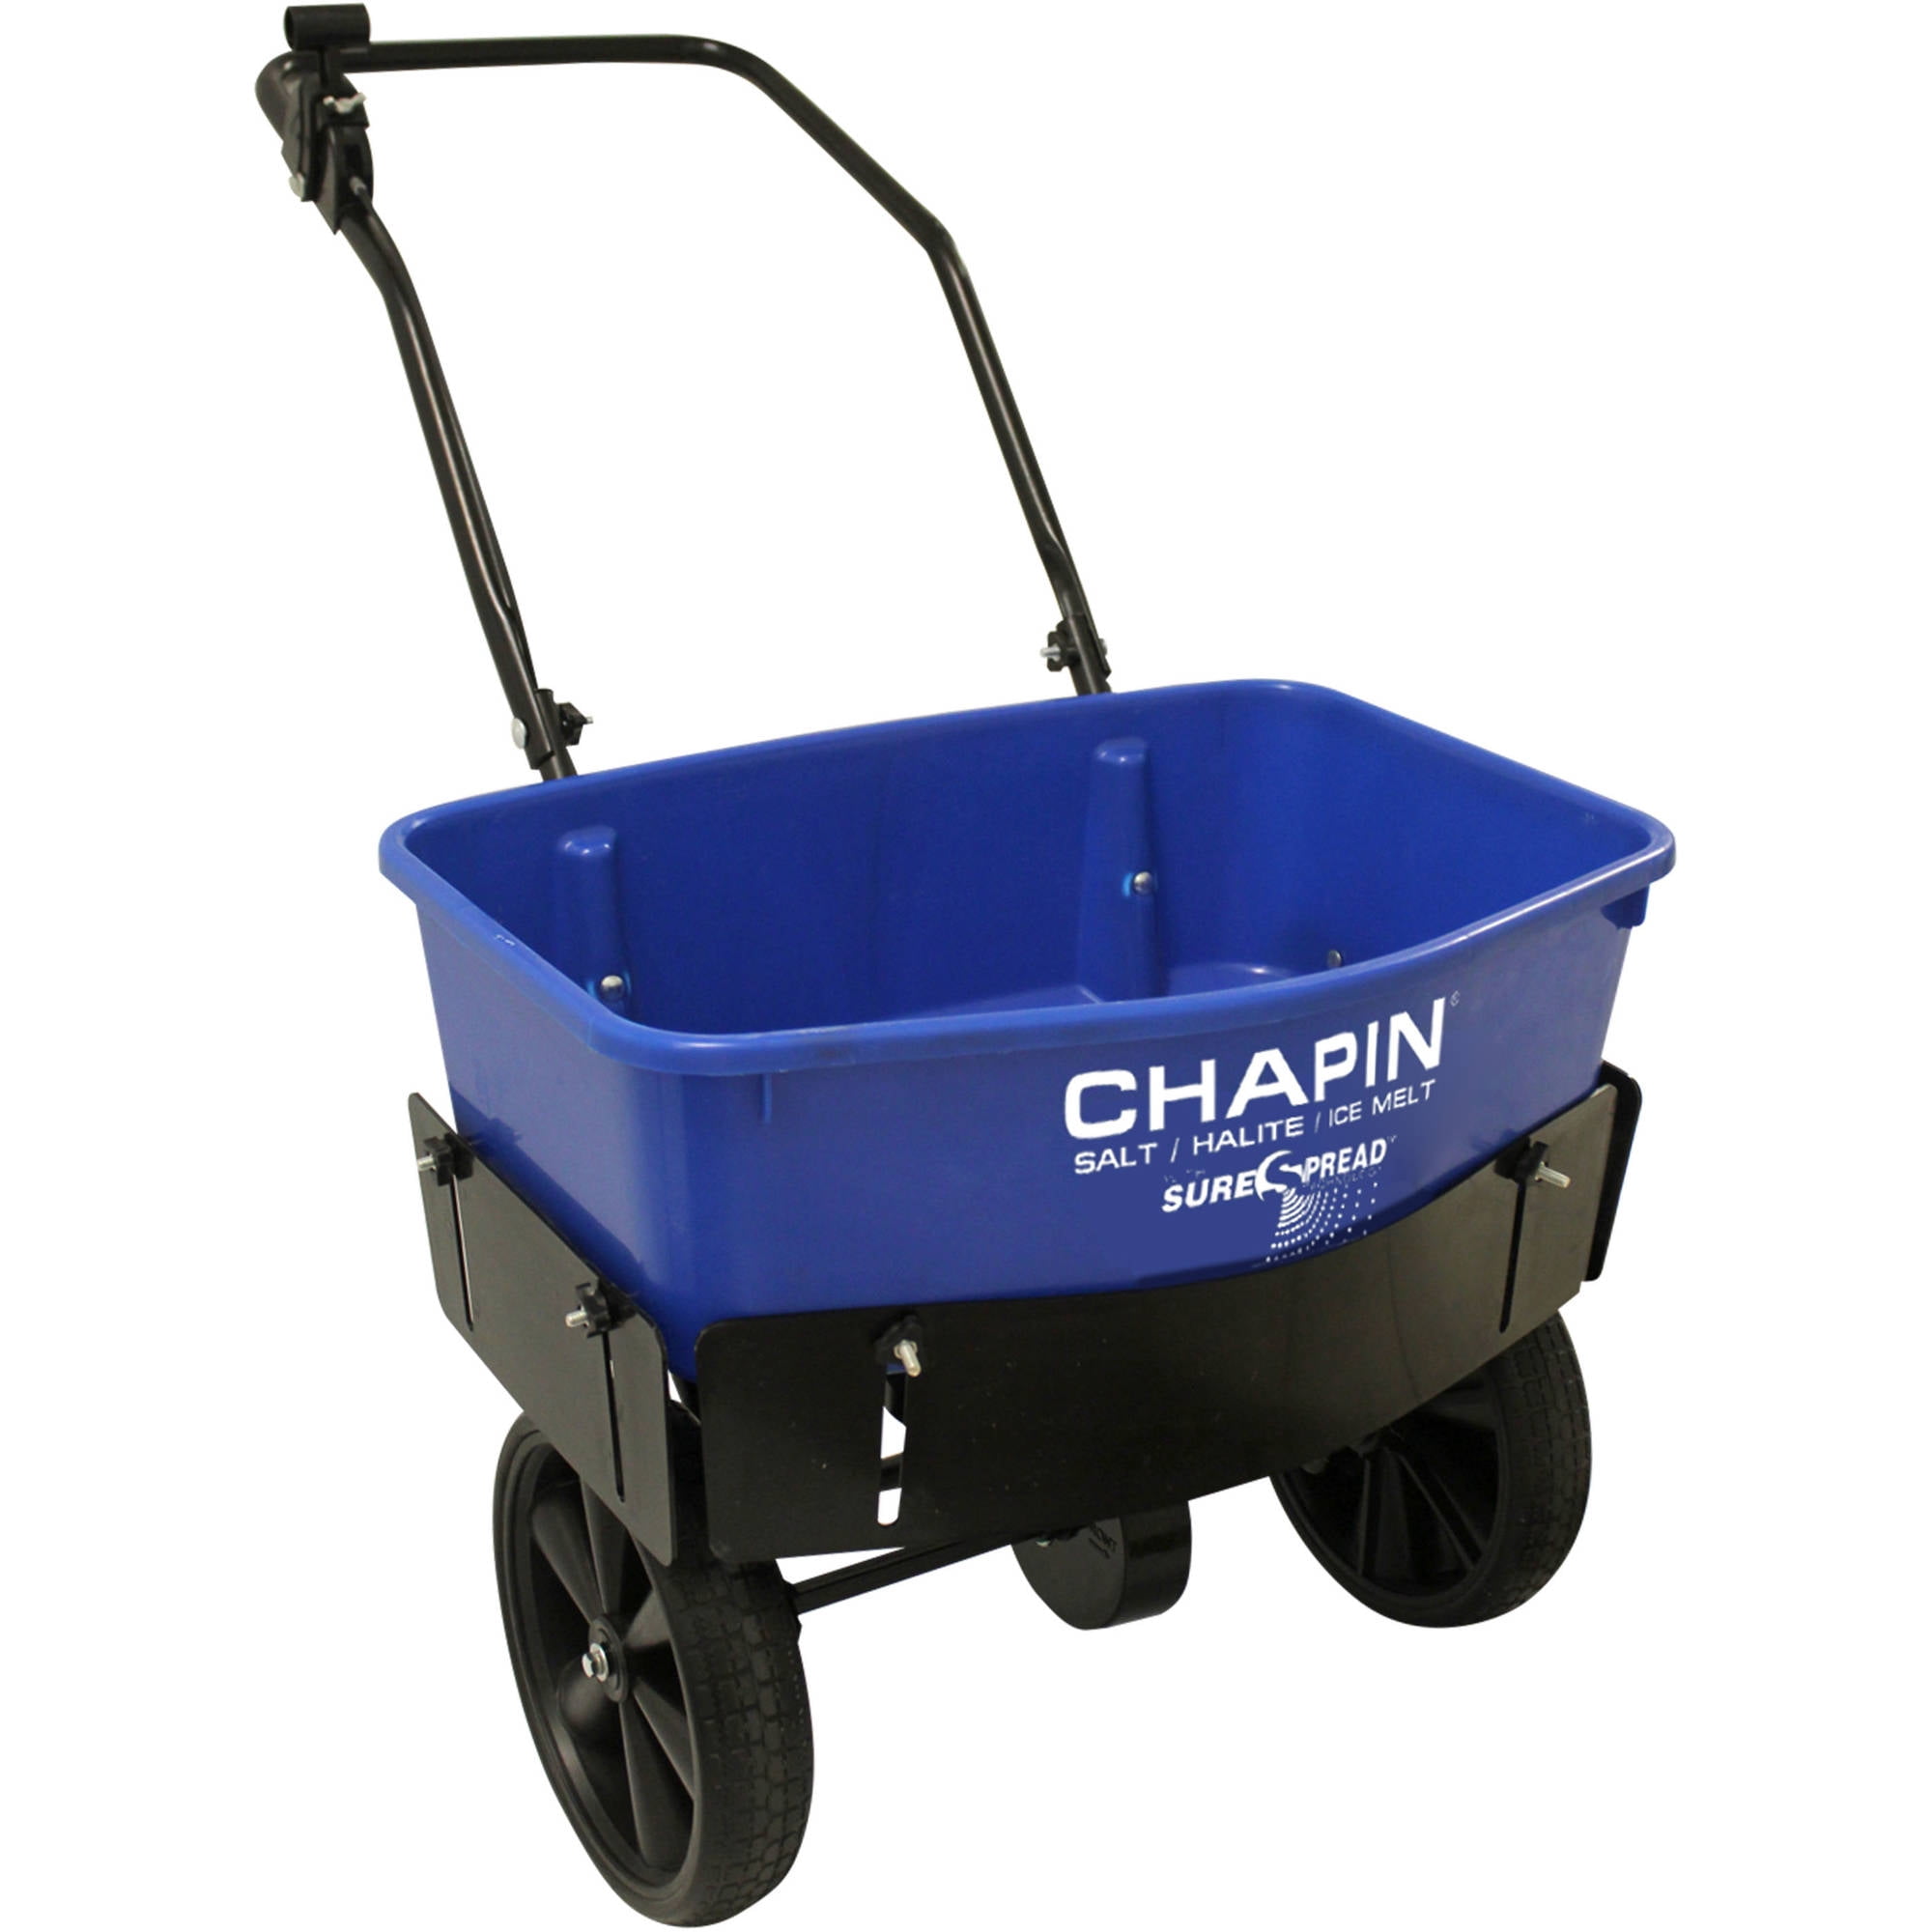 Blue Chapin International Chapin 8003A 70-Pound Residential Salt Spreader with Baffles 